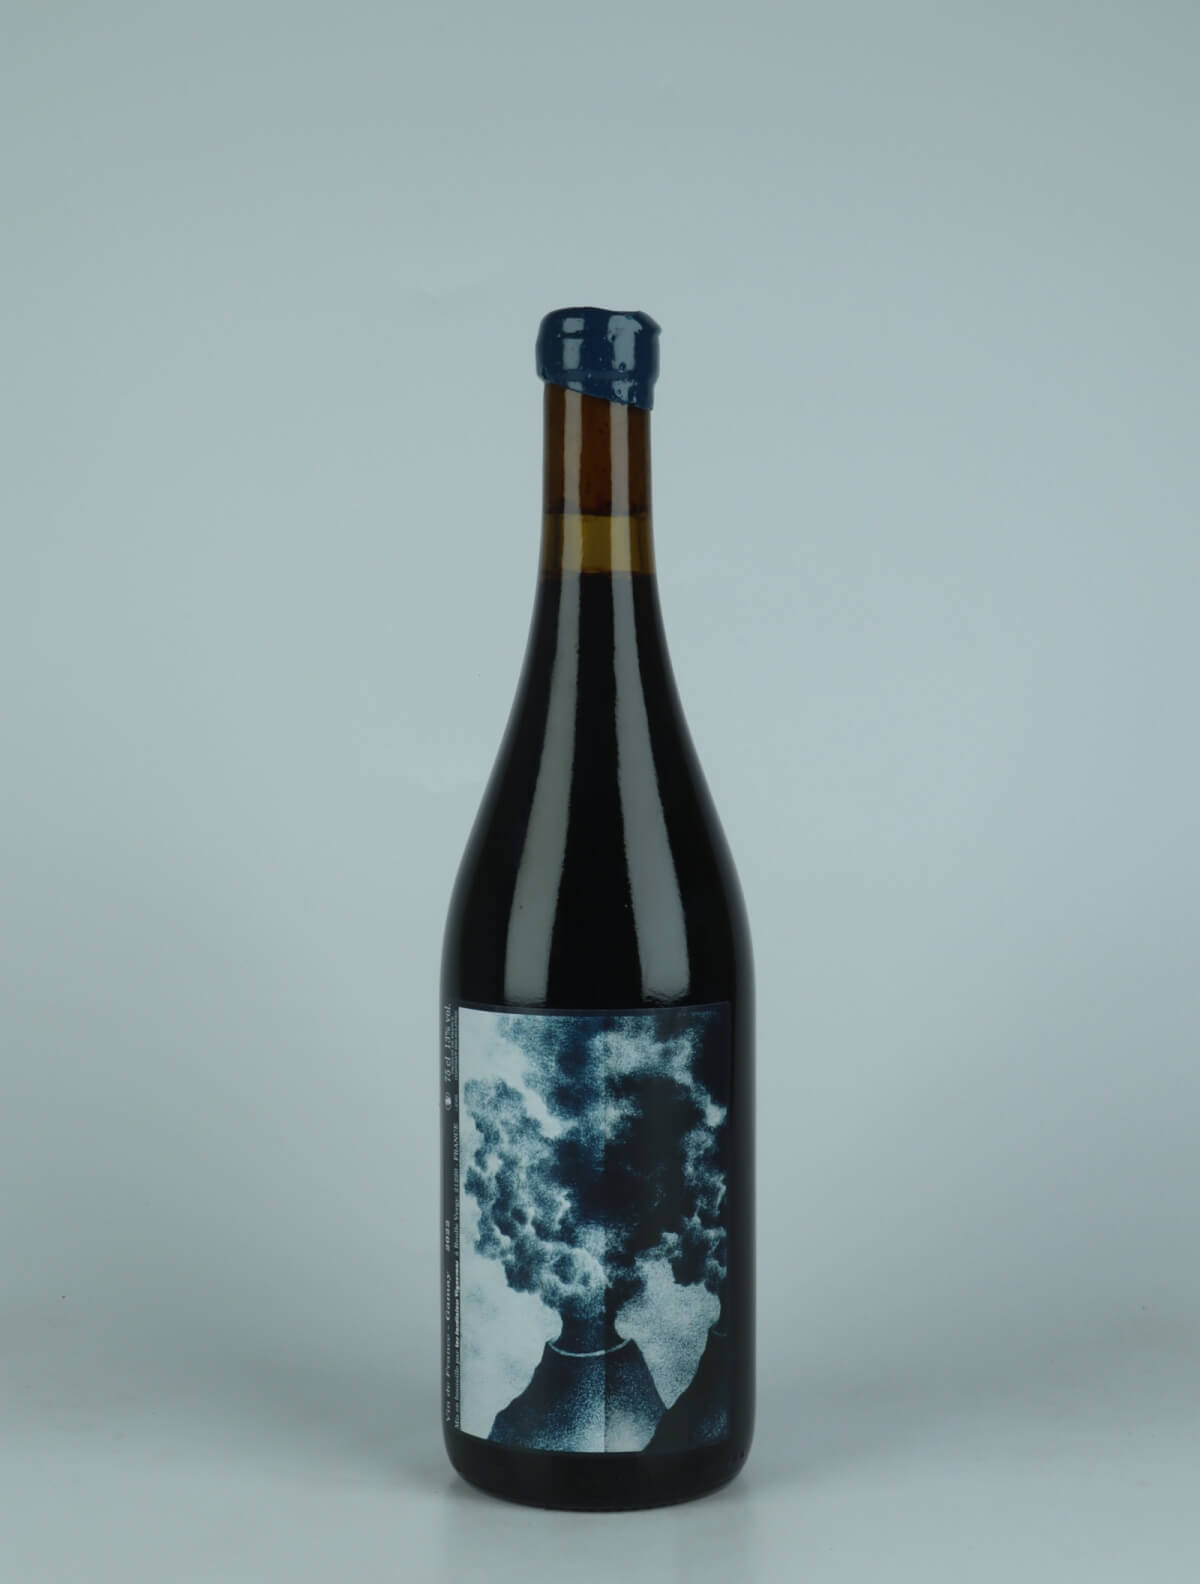 A bottle 2022 Gamay Red wine from Les Jardiniers Vignerons, Beaujolais in France